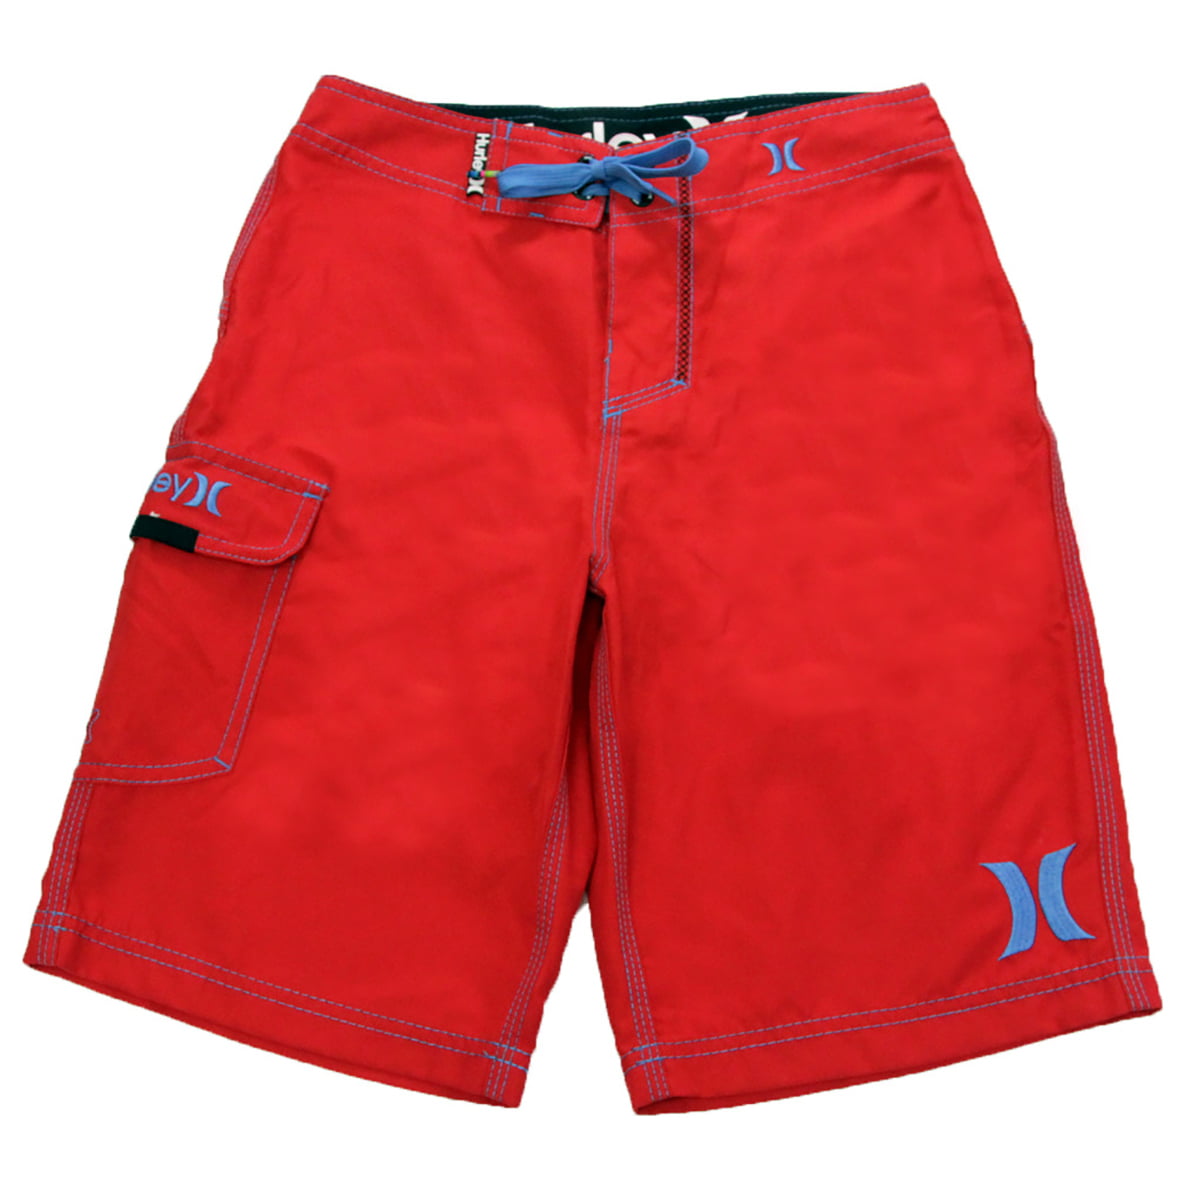 Hurley Boys One and Only Boardshorts Big Kids